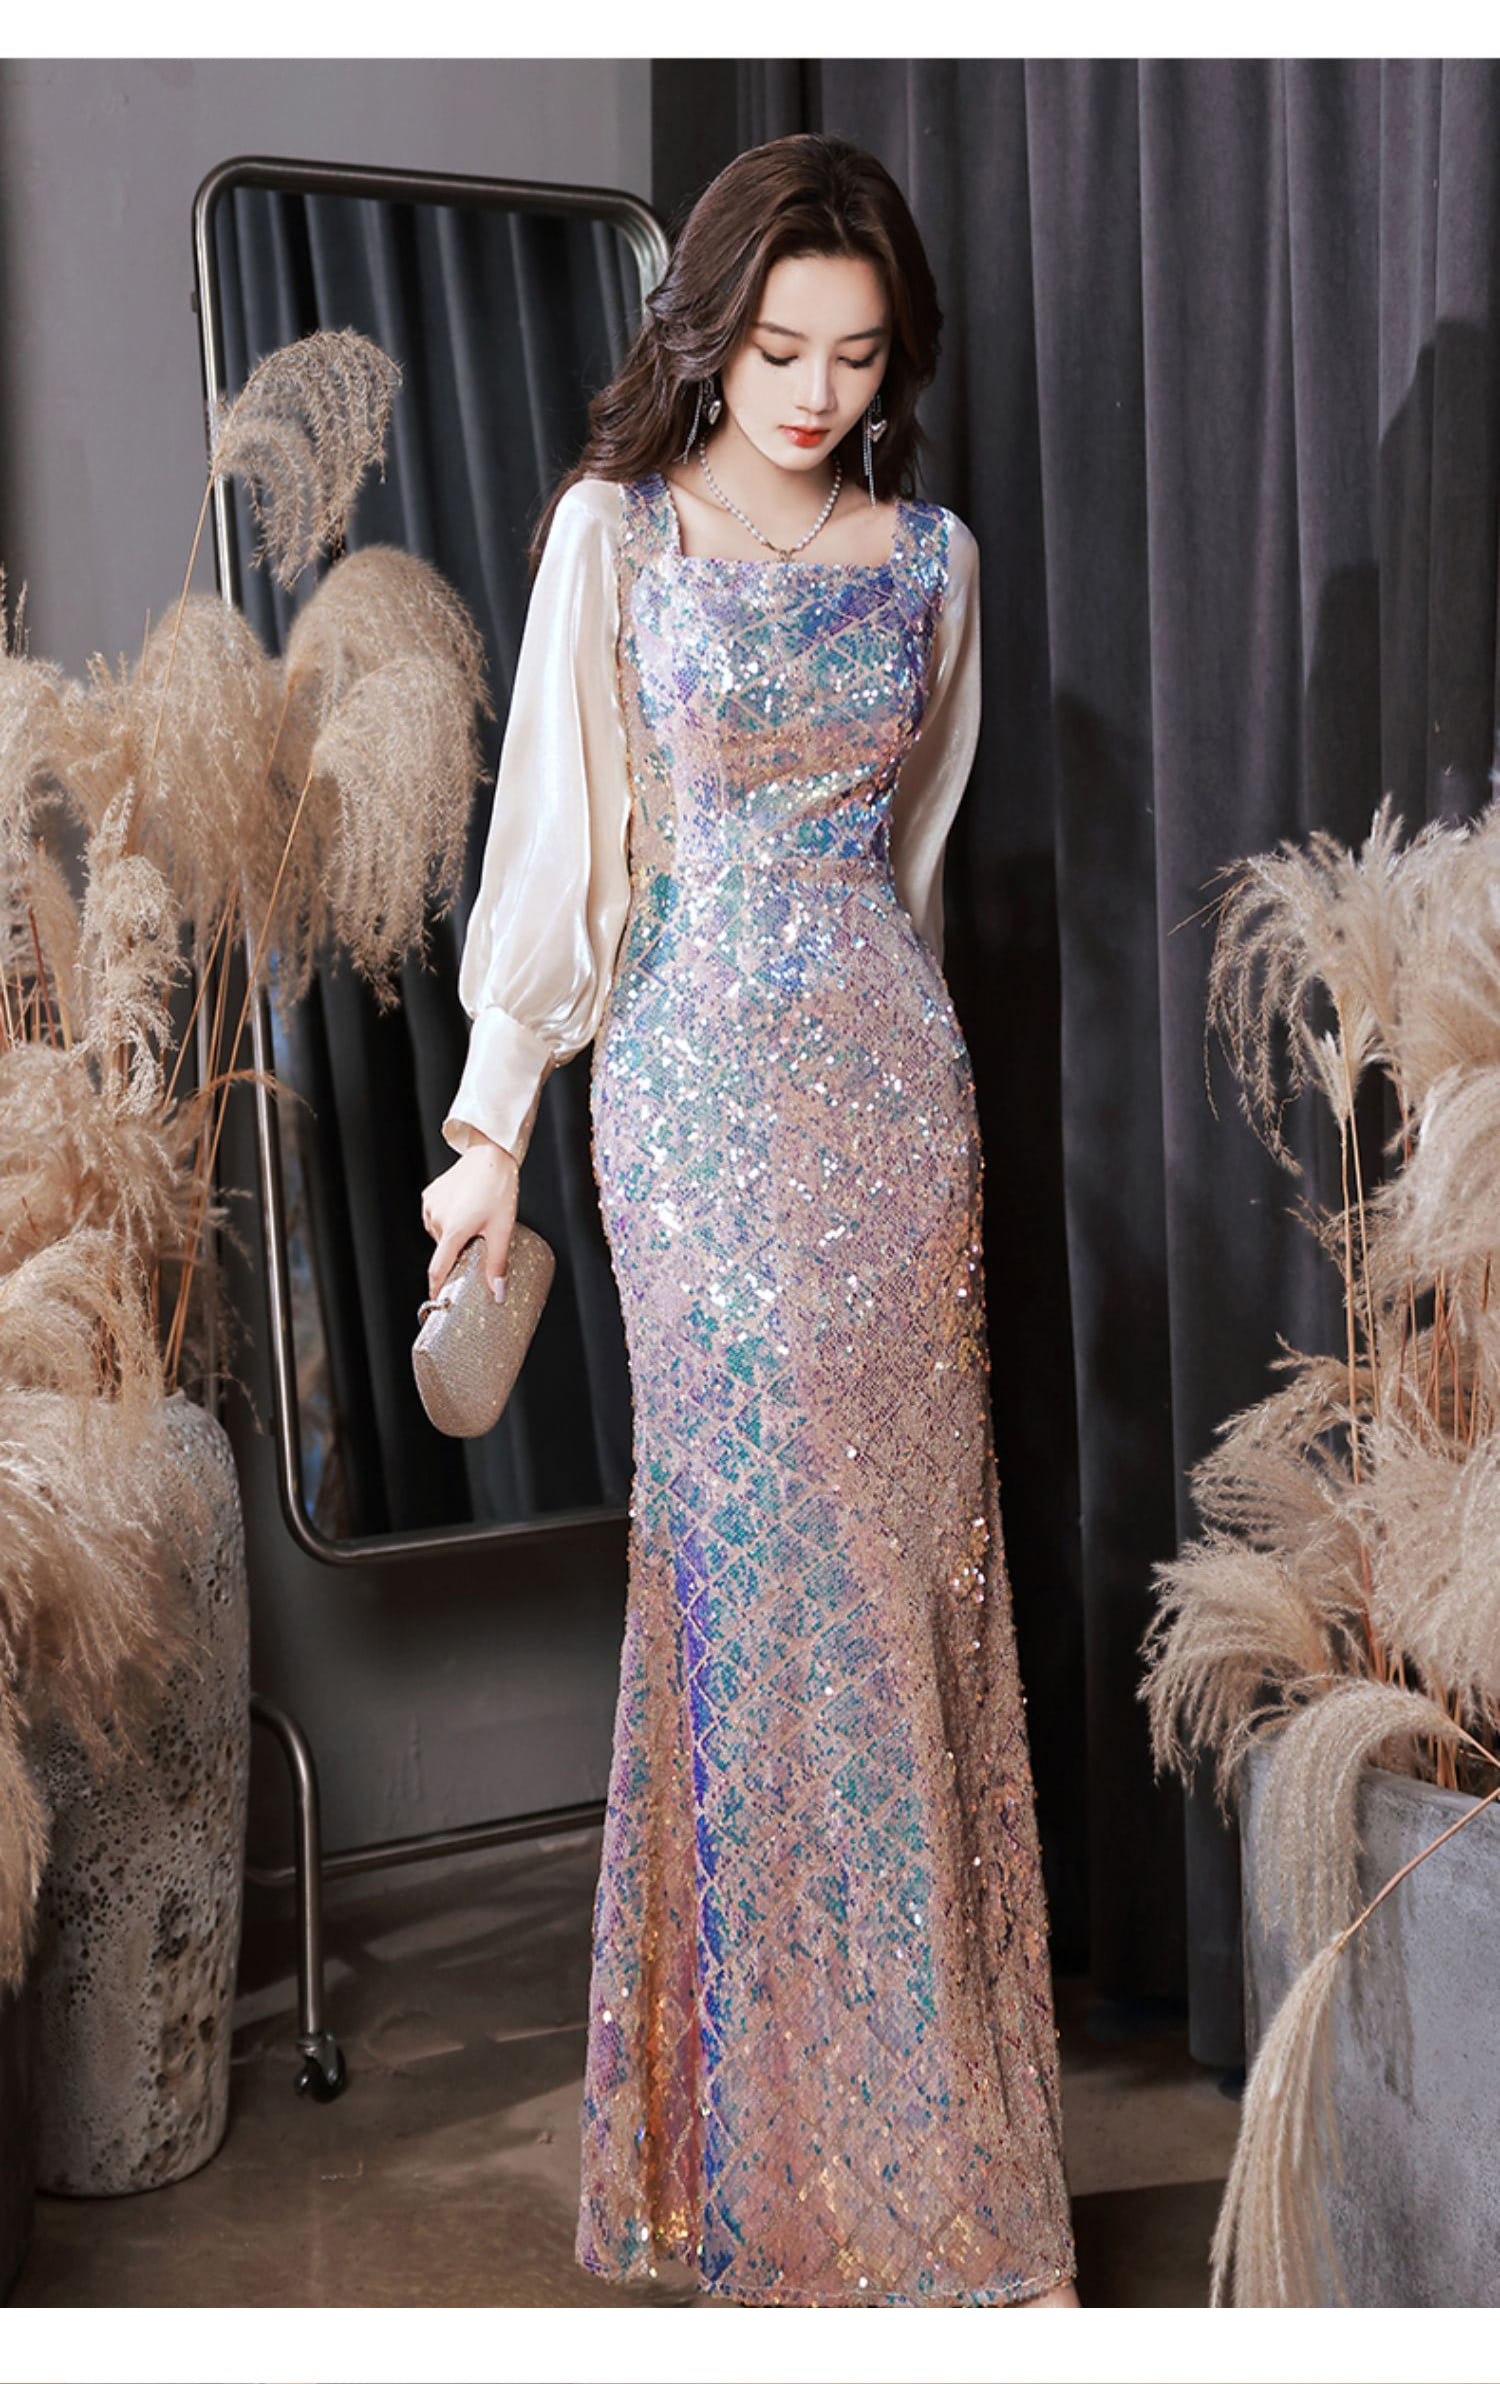 Luxury-Sparkly-Square-Neck-Long-Sleeve-Banquet-Party-Fishtail-Dress18